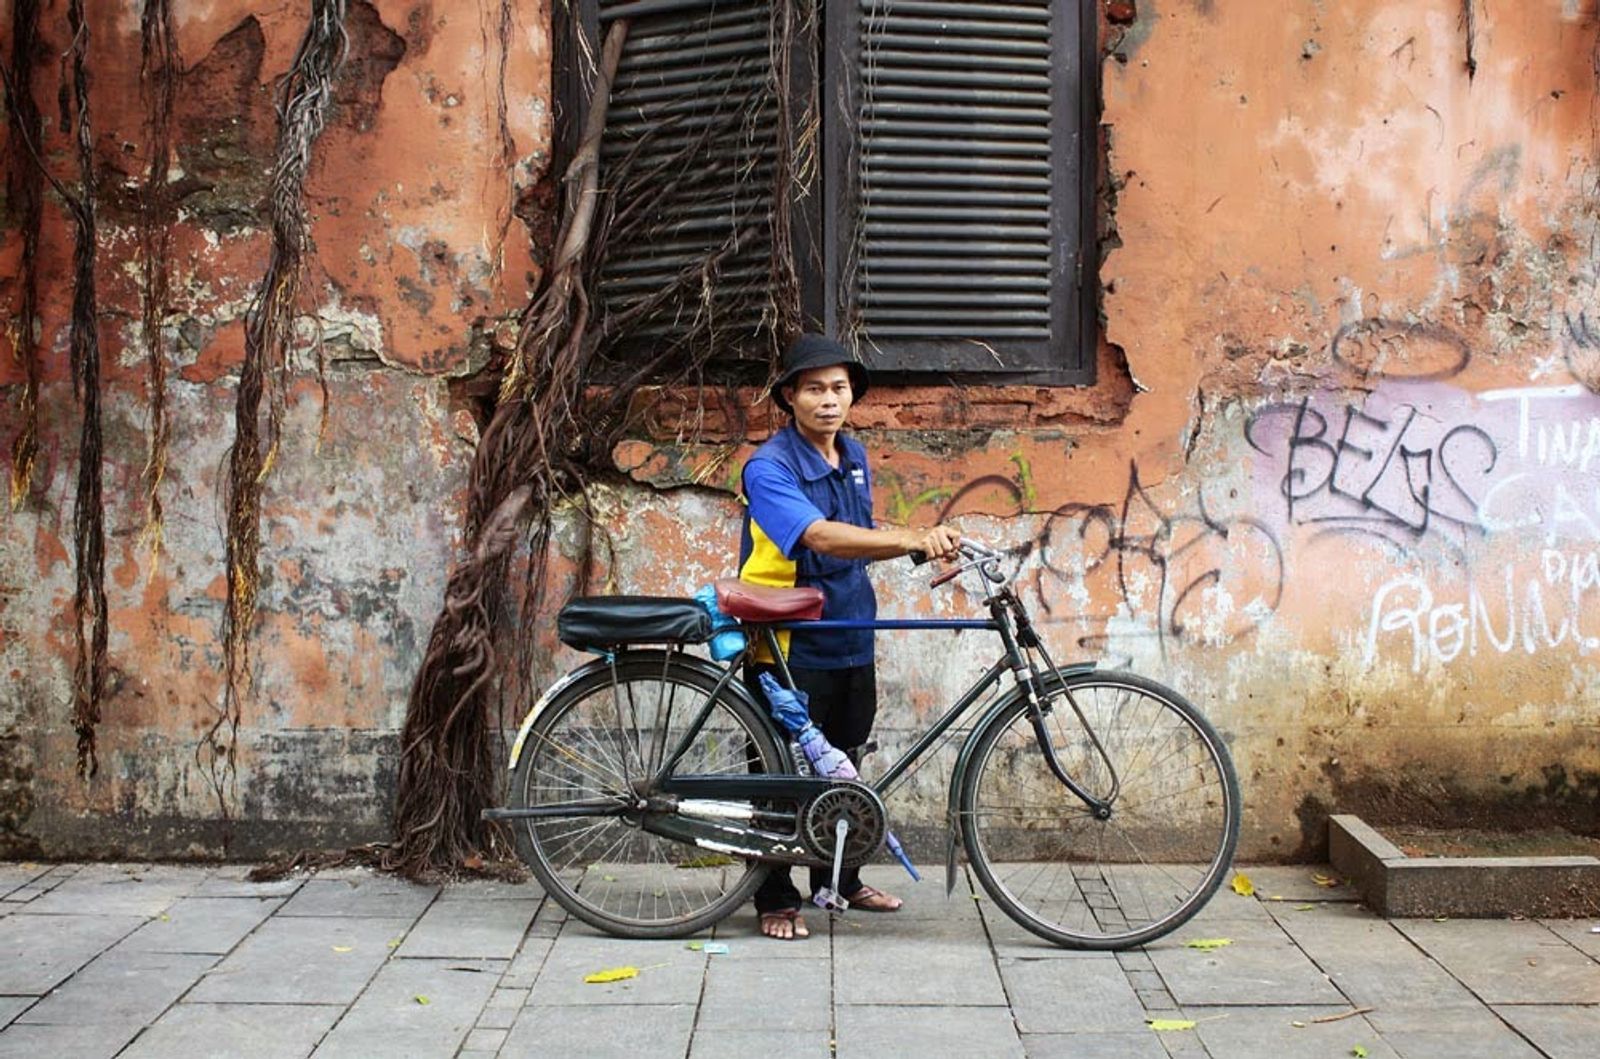 © idealita ismanto - Image from the Bicycle Ojek photography project